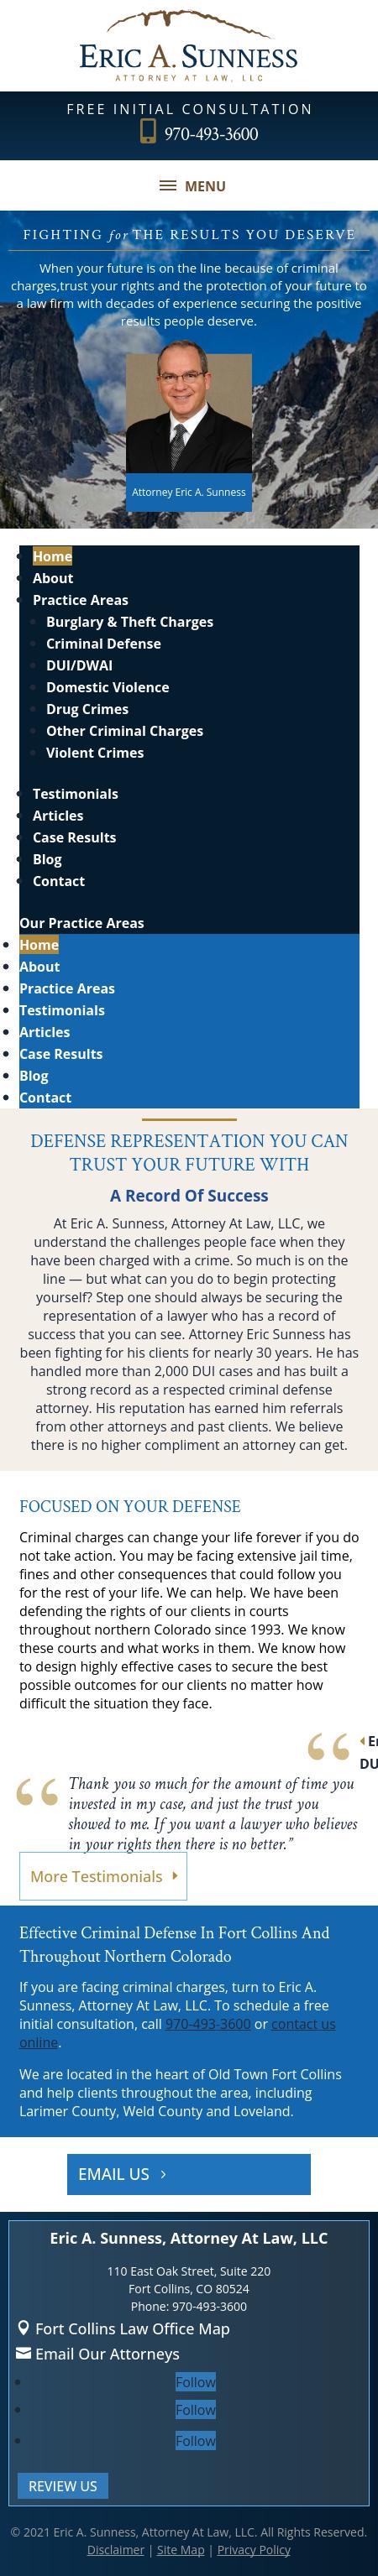 Eric A. Sunness, Attorney at Law, LLC - Fort Collins CO Lawyers